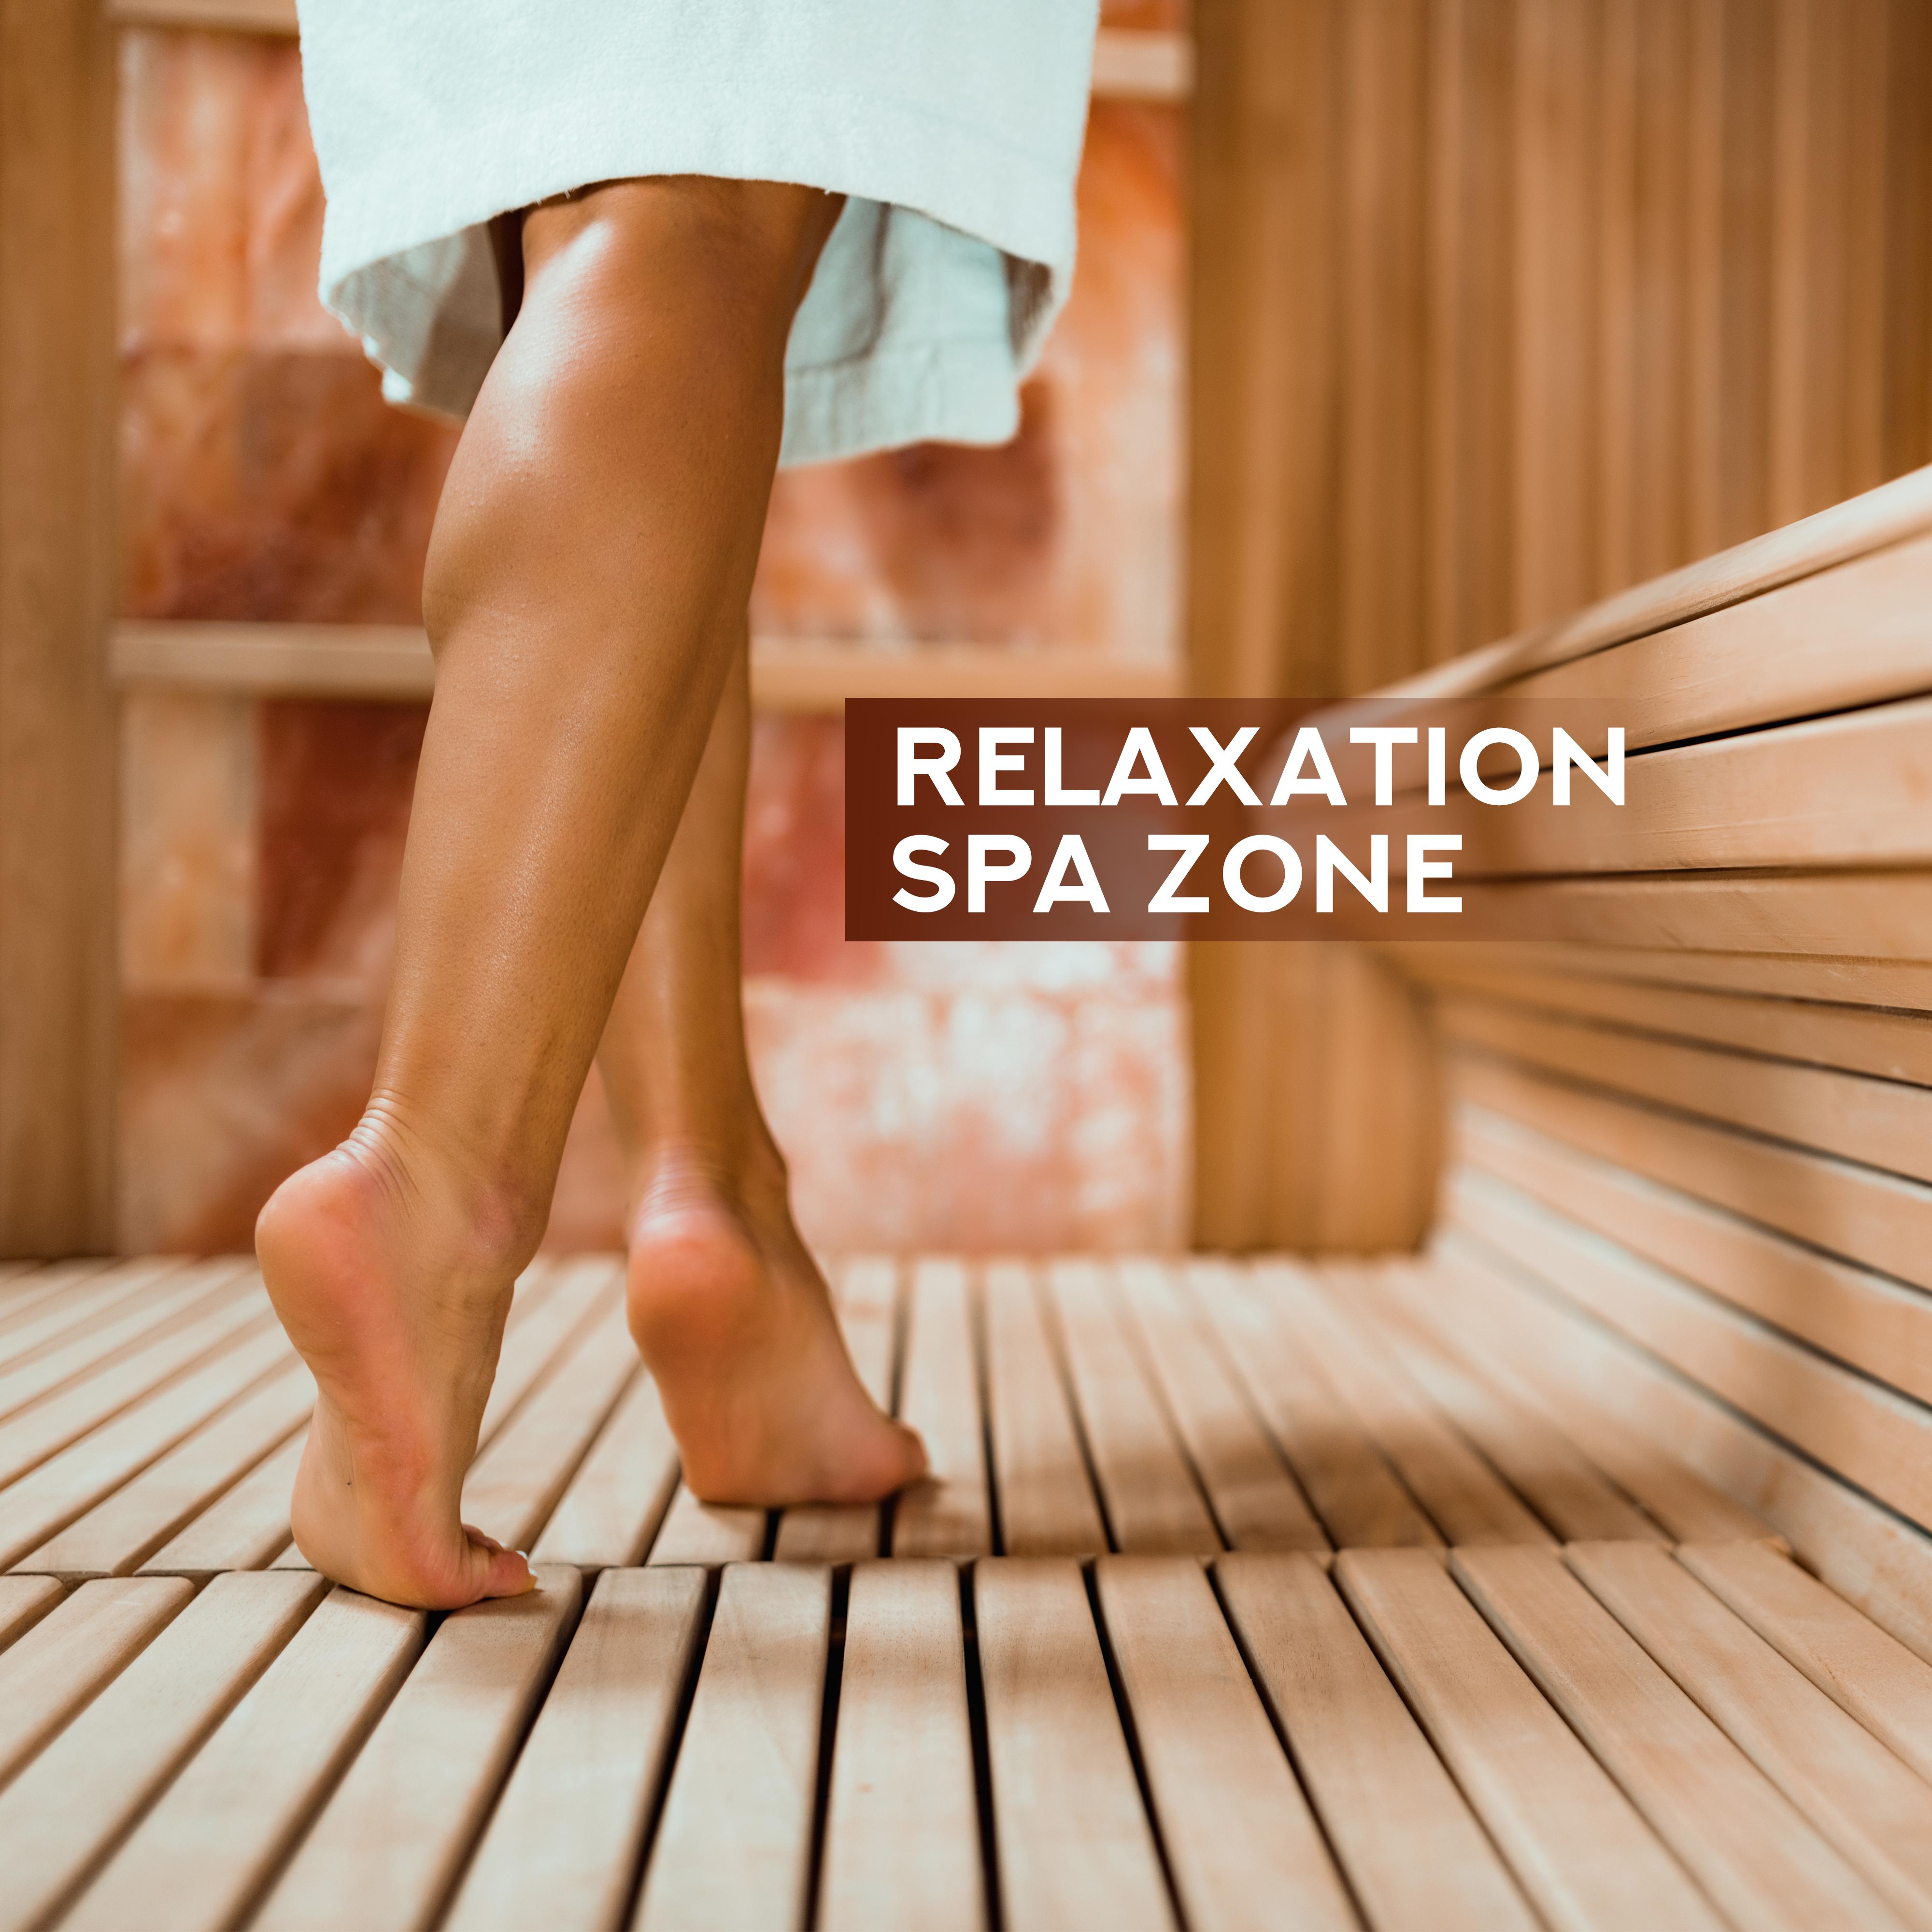 Relaxation Spa Zone  New Age Music for Massage, Spa  Wellness, Sleep, Deep Harmony, Stress Relief, Zen, Lounge Music, Pure Relaxation